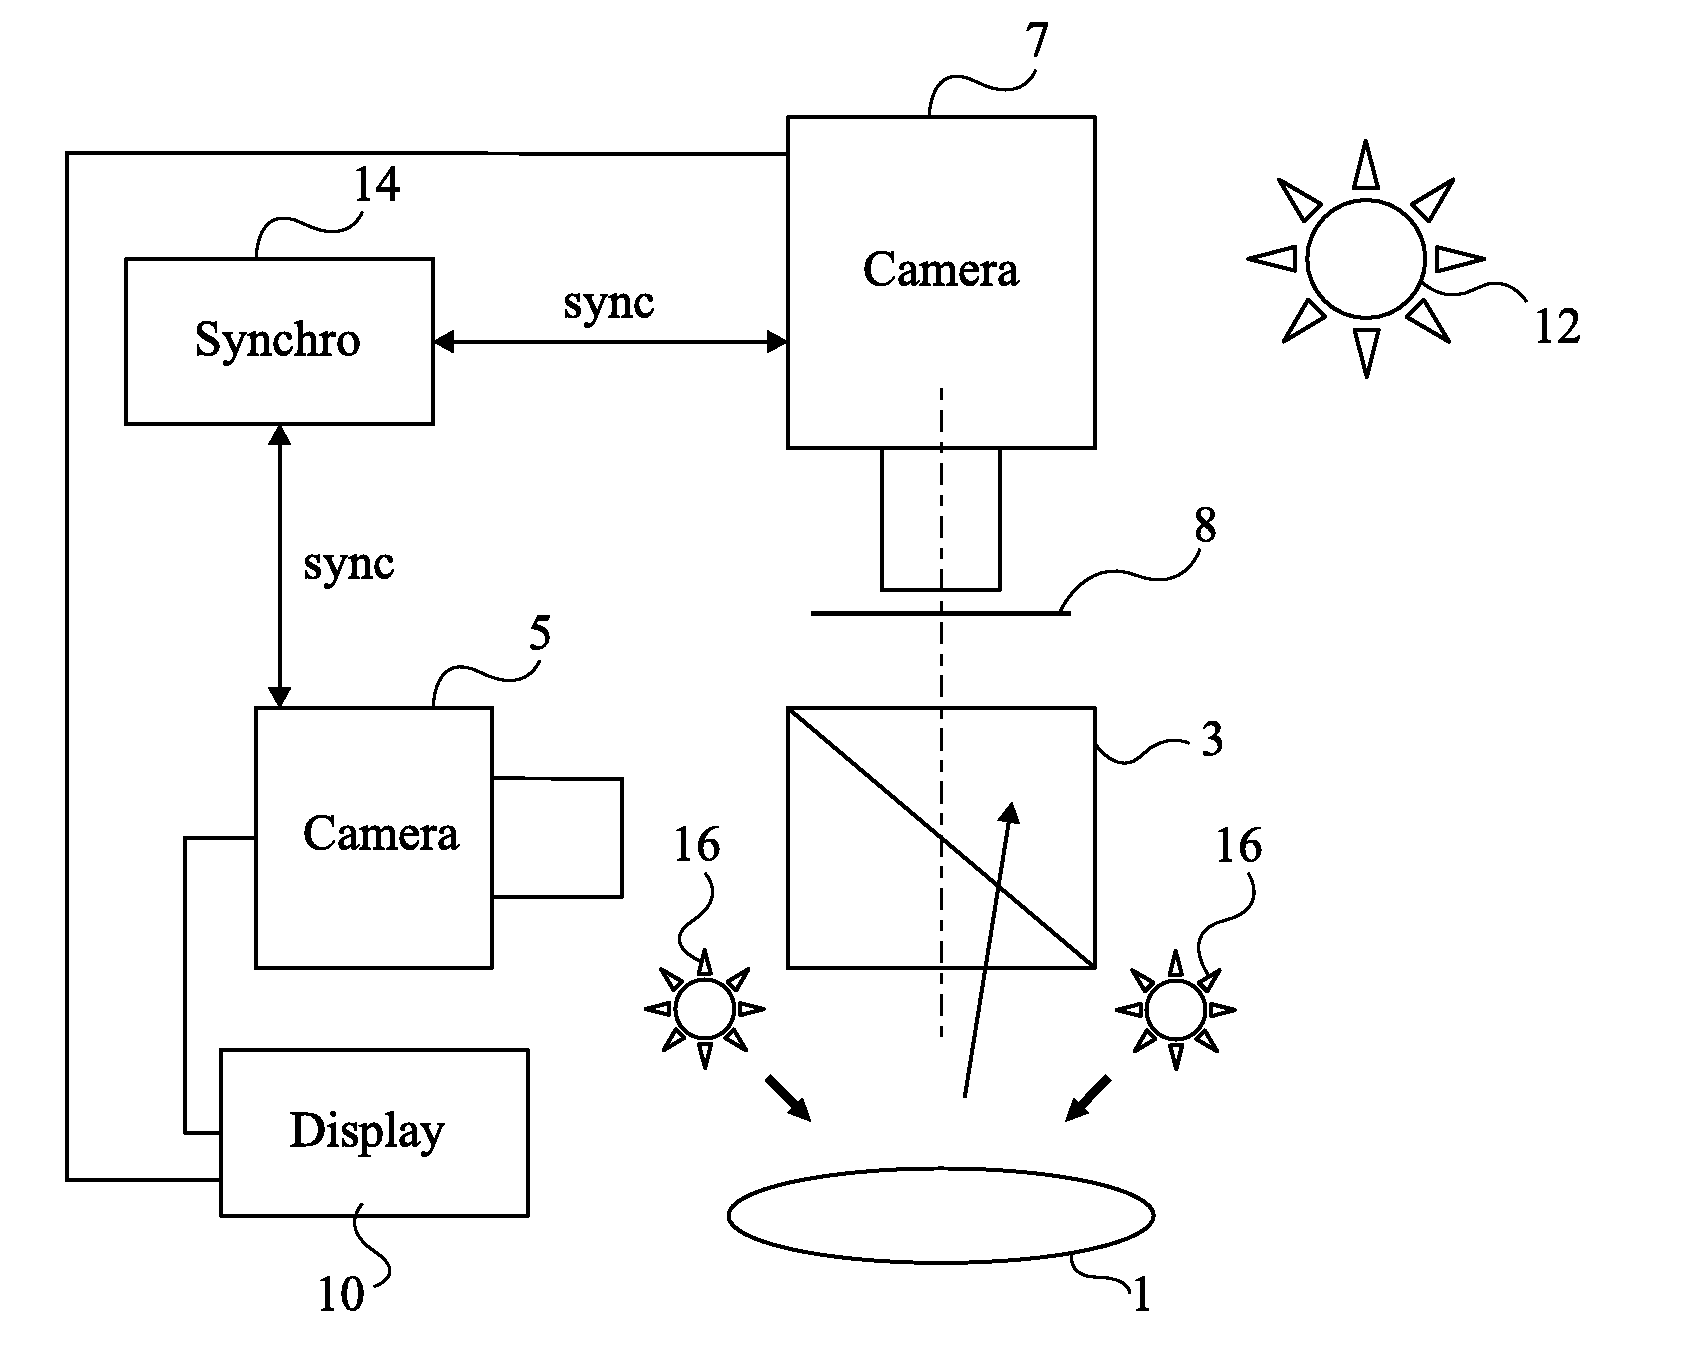 System of fluorescence analysis of a field in an illuminated area